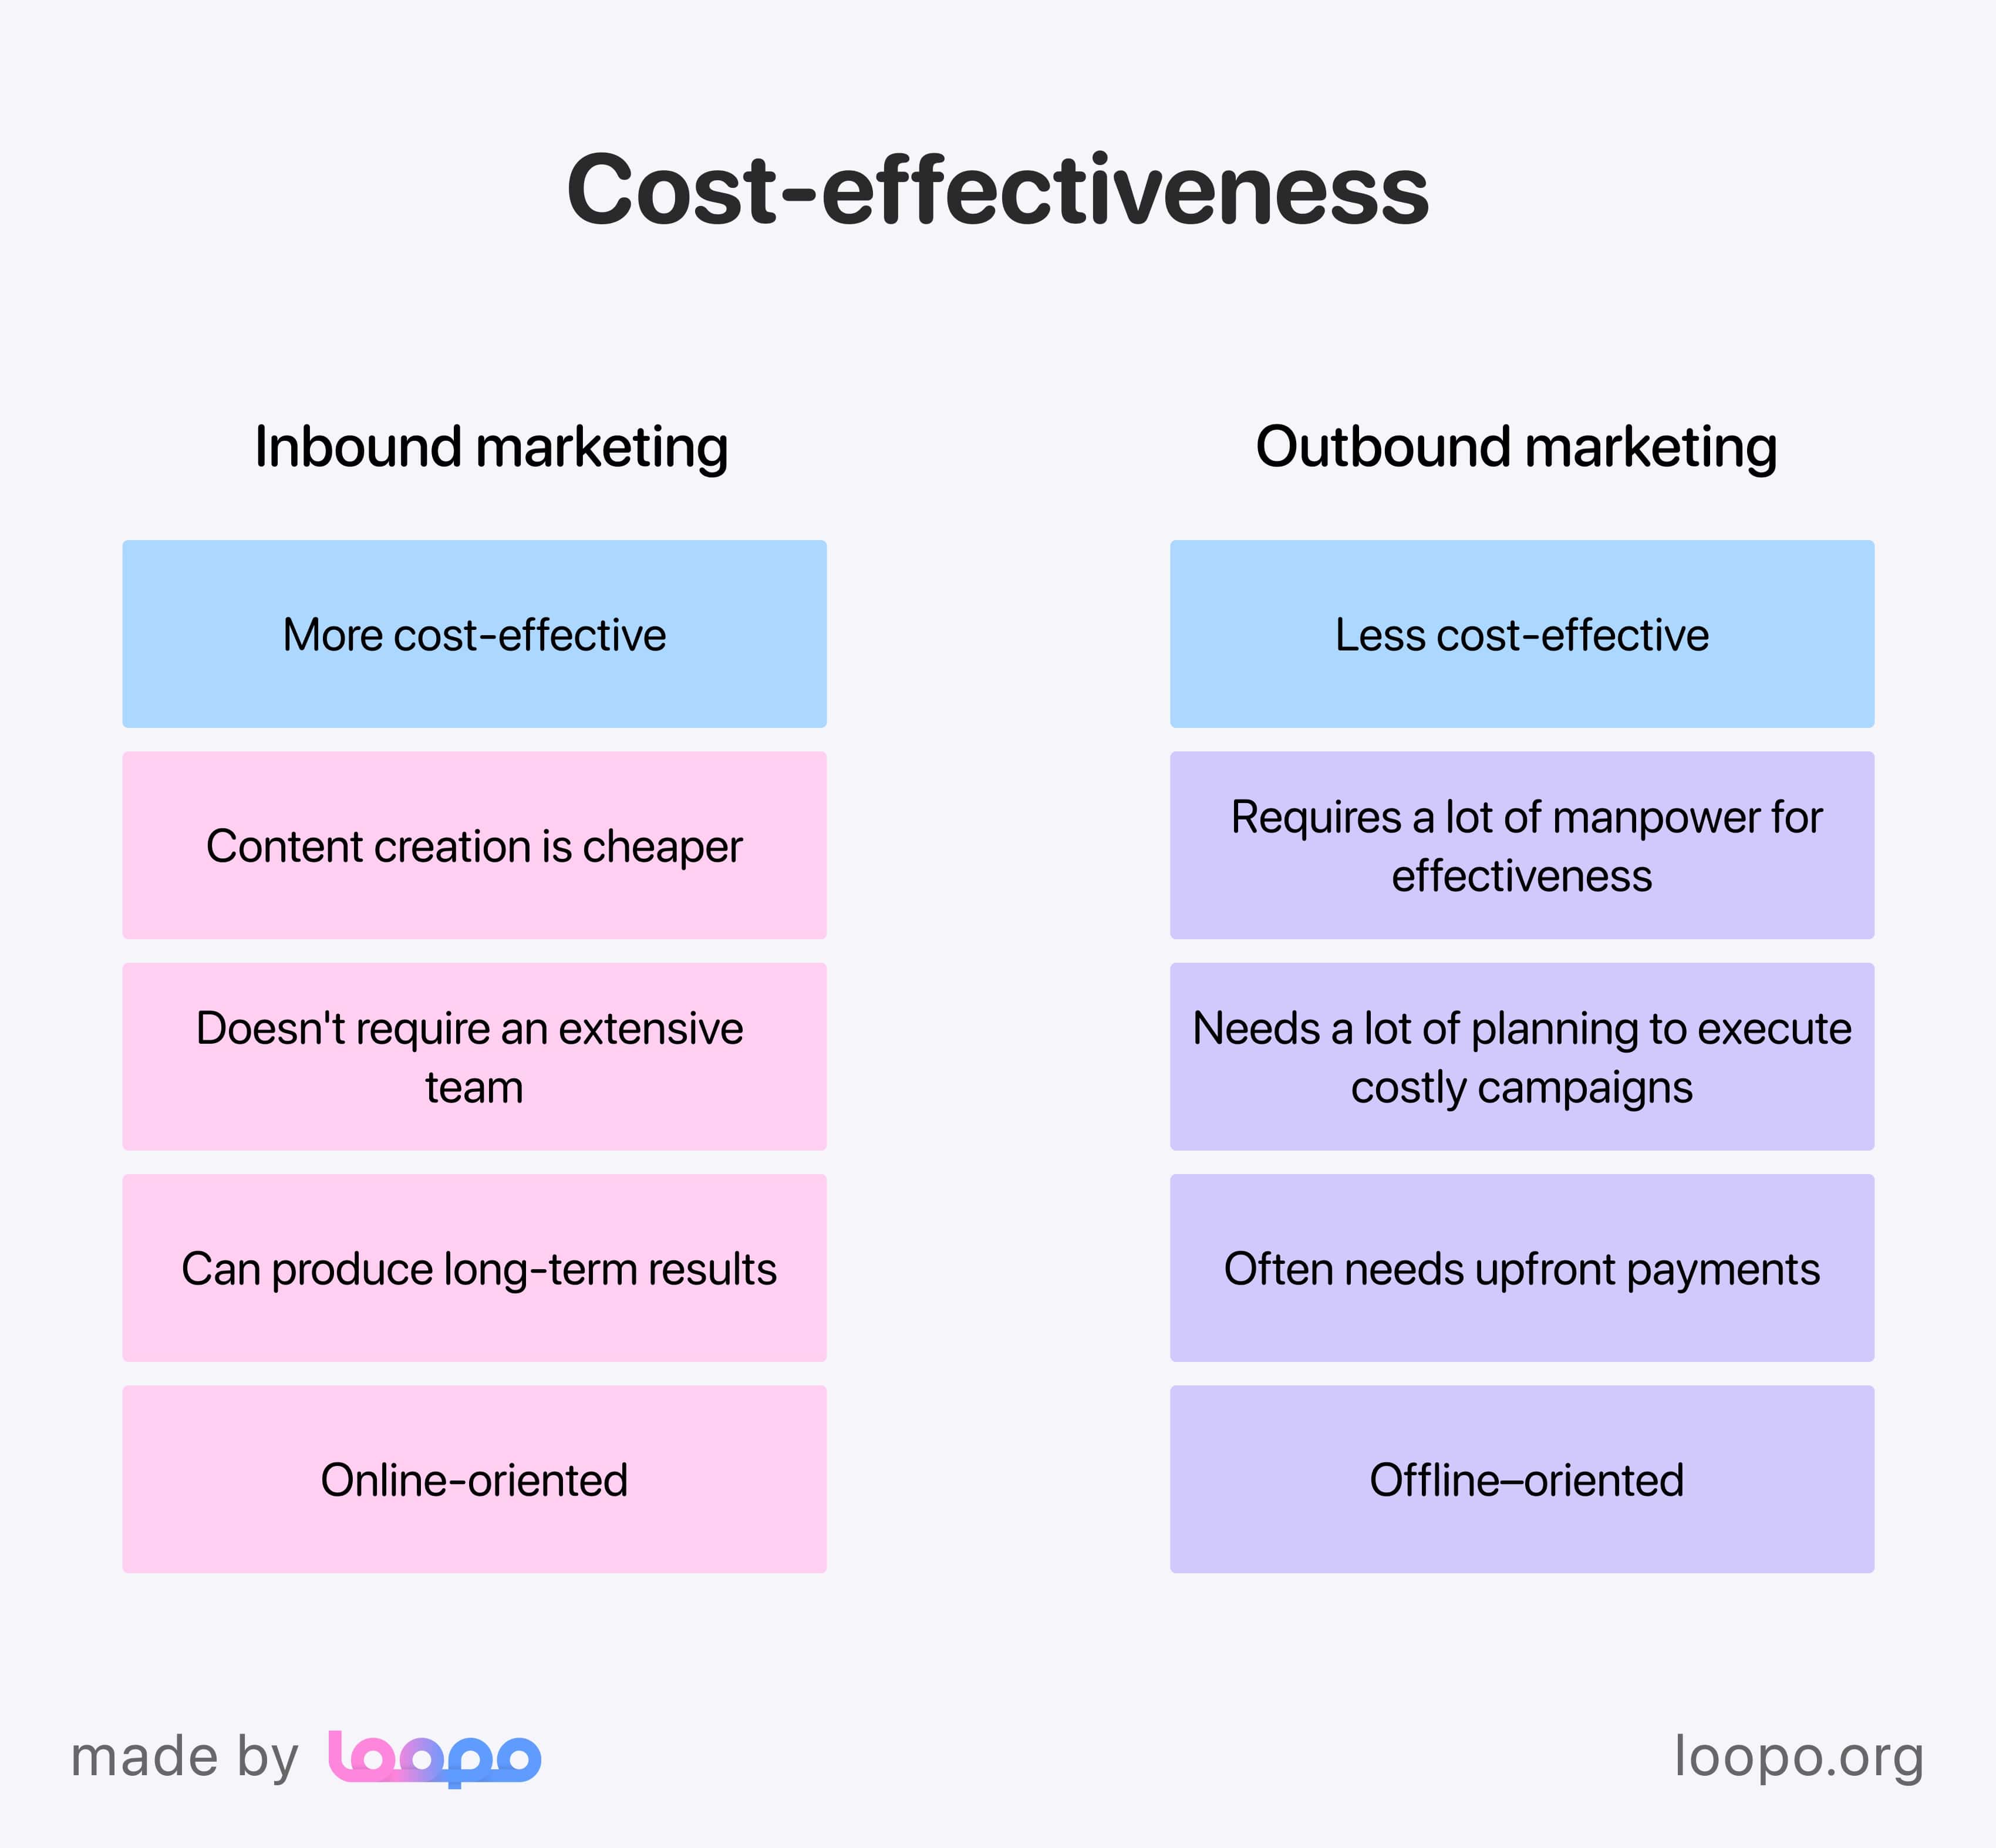 Inbound and outbound marketing comparison in terms of cost-effectiveness